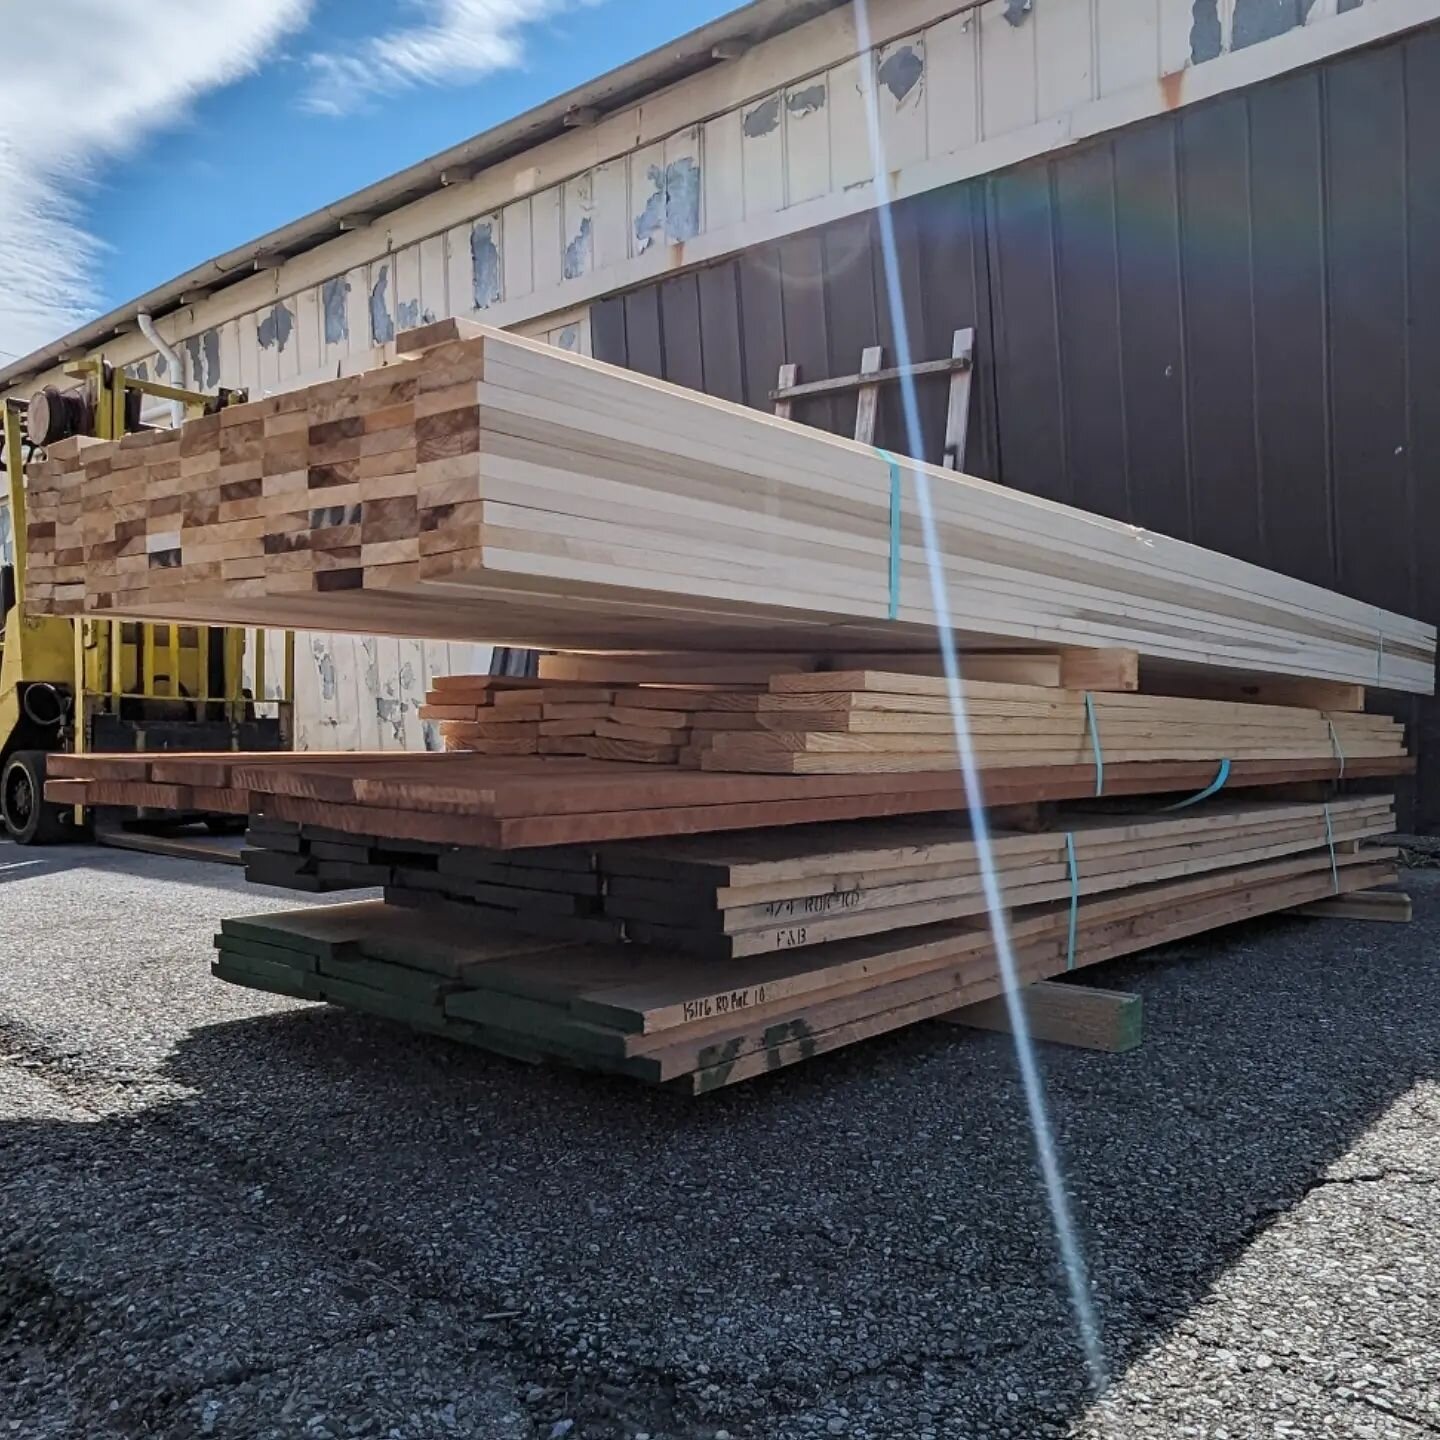 Hey woodworkers and contractors!

If you need a fair amount of S4S stock, touch base with me. I can check with my suppliers for availability. This is 1300 linear feet of 1x4 poplar. Much less expensive than the big box stores and the quality is proba